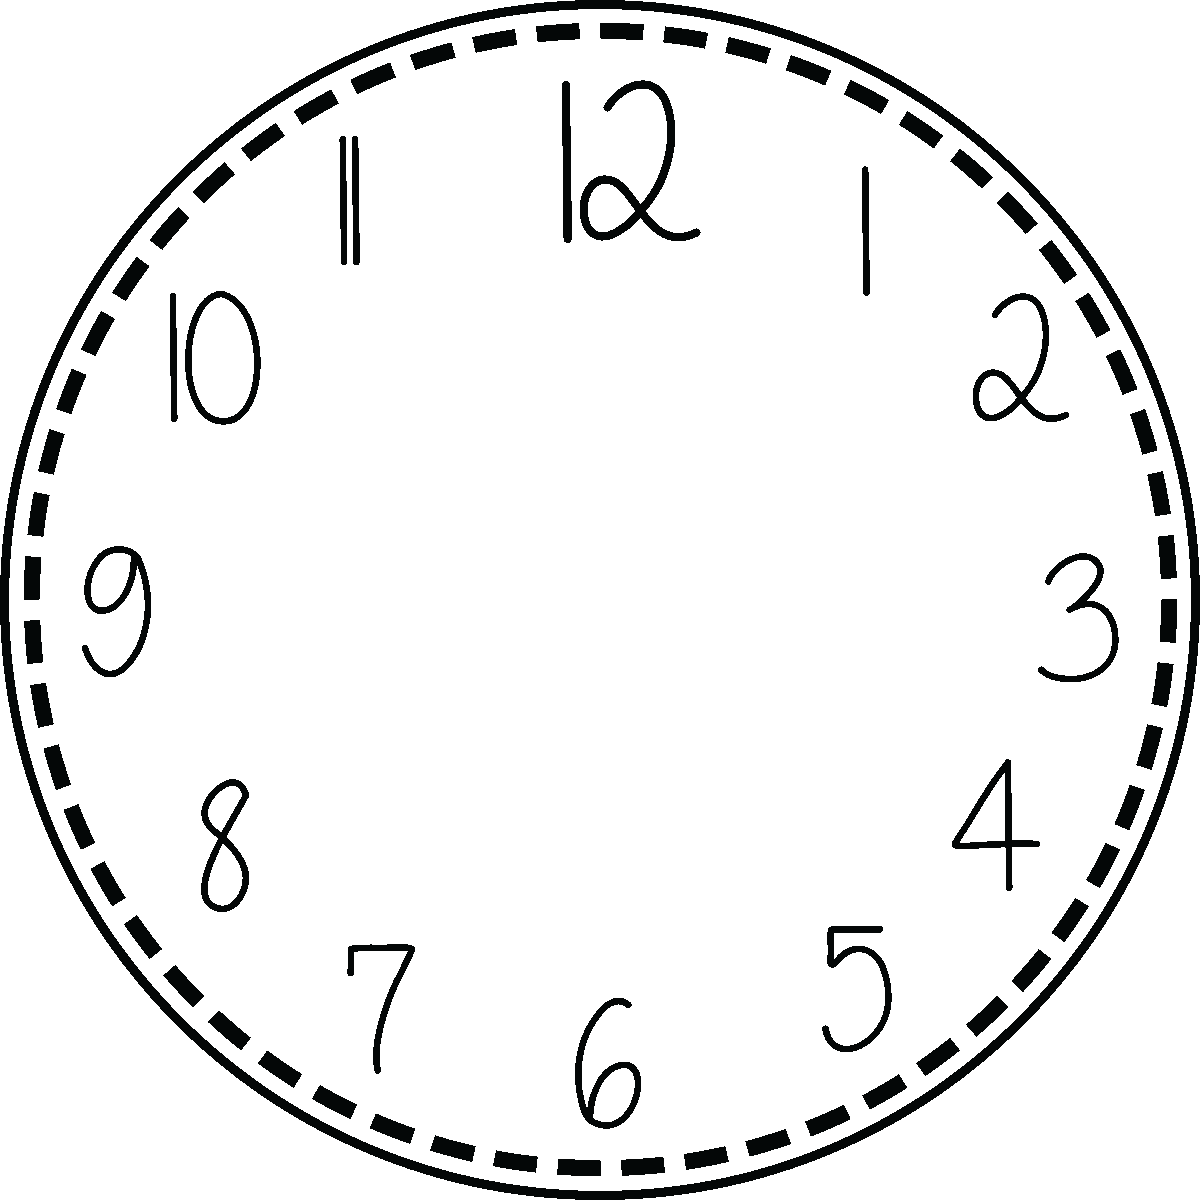 Clock Faces, Clocks, Tag Watches, Clock, The Hours - Project Based Learning Logo (1200x1200)